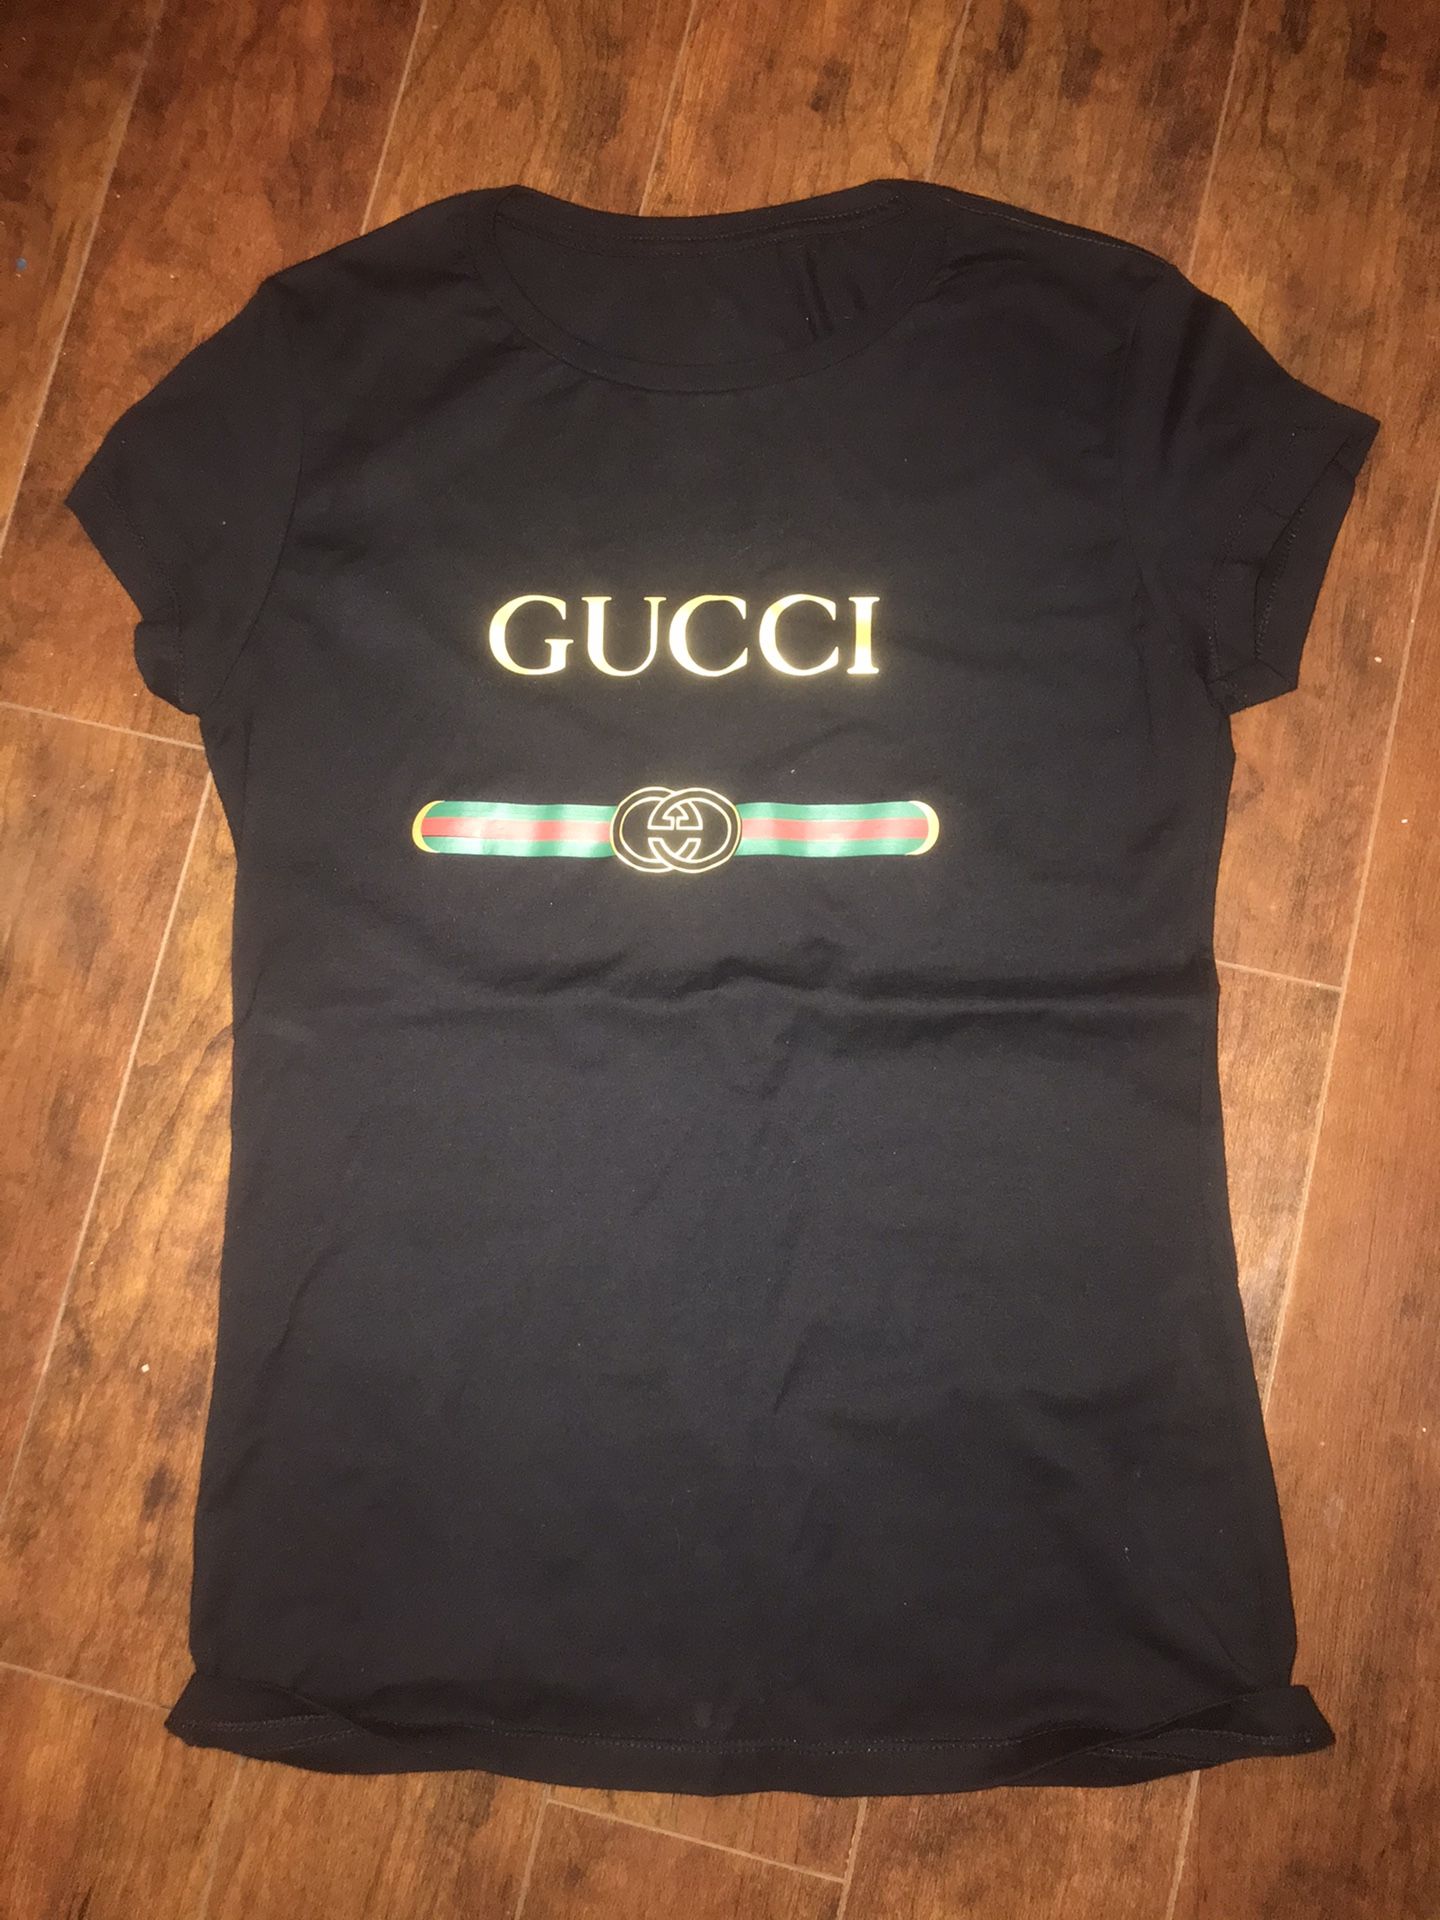 Gucci print T-shirt size m/l new without tags women